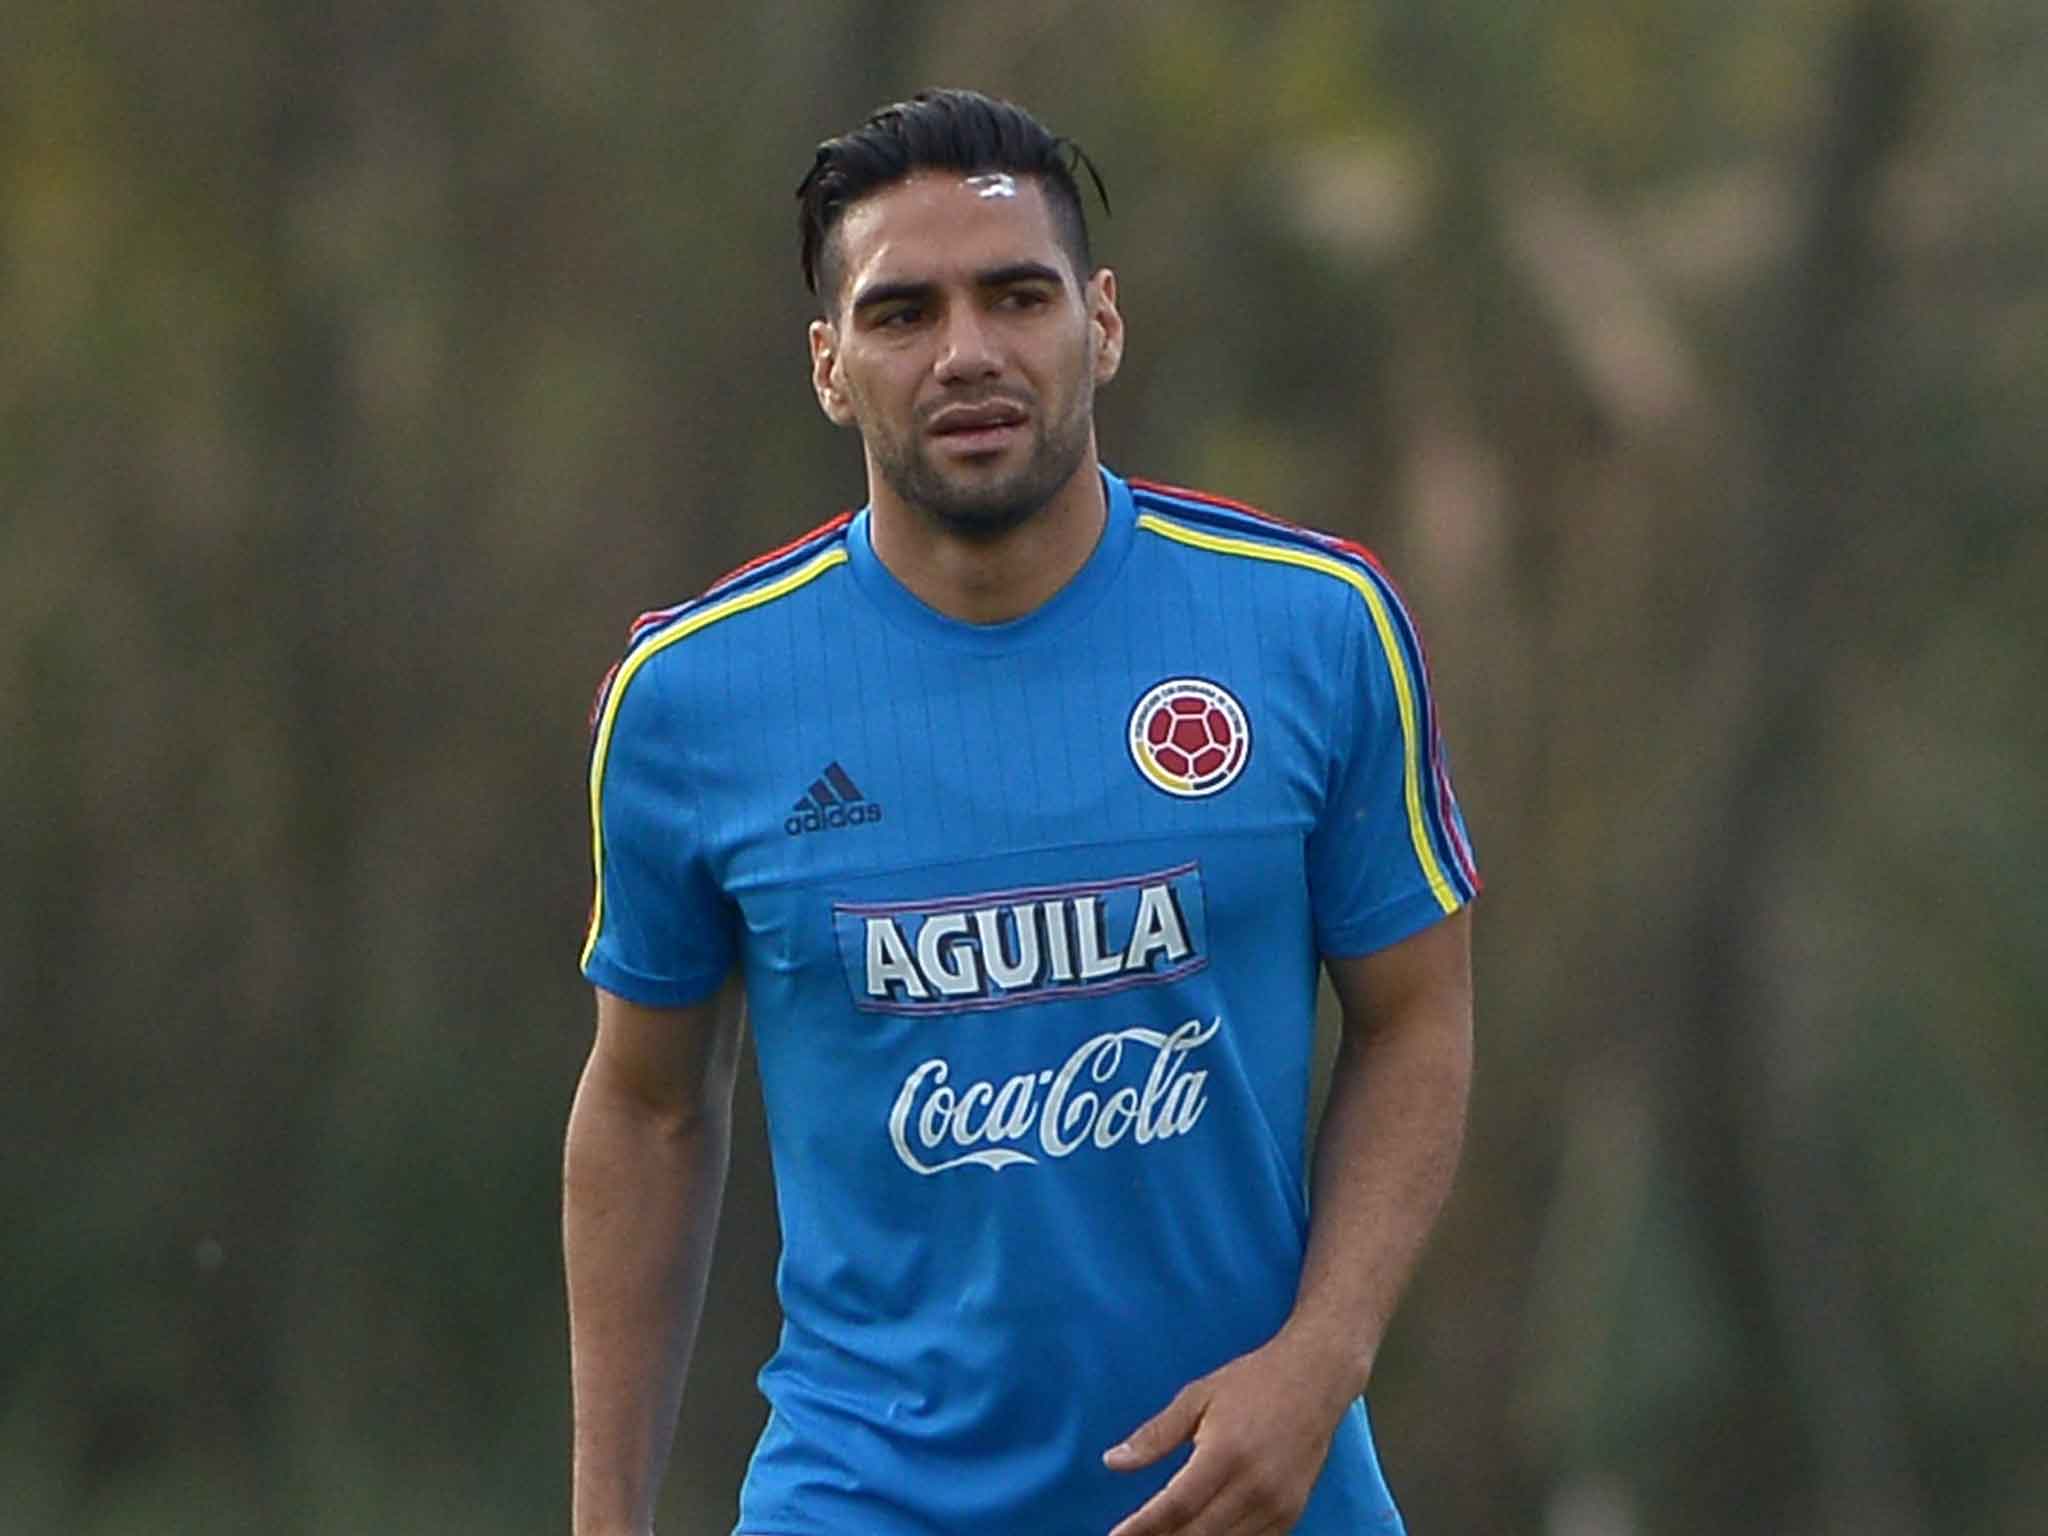 Radamel Falcao during training with Colombia at the Copa America